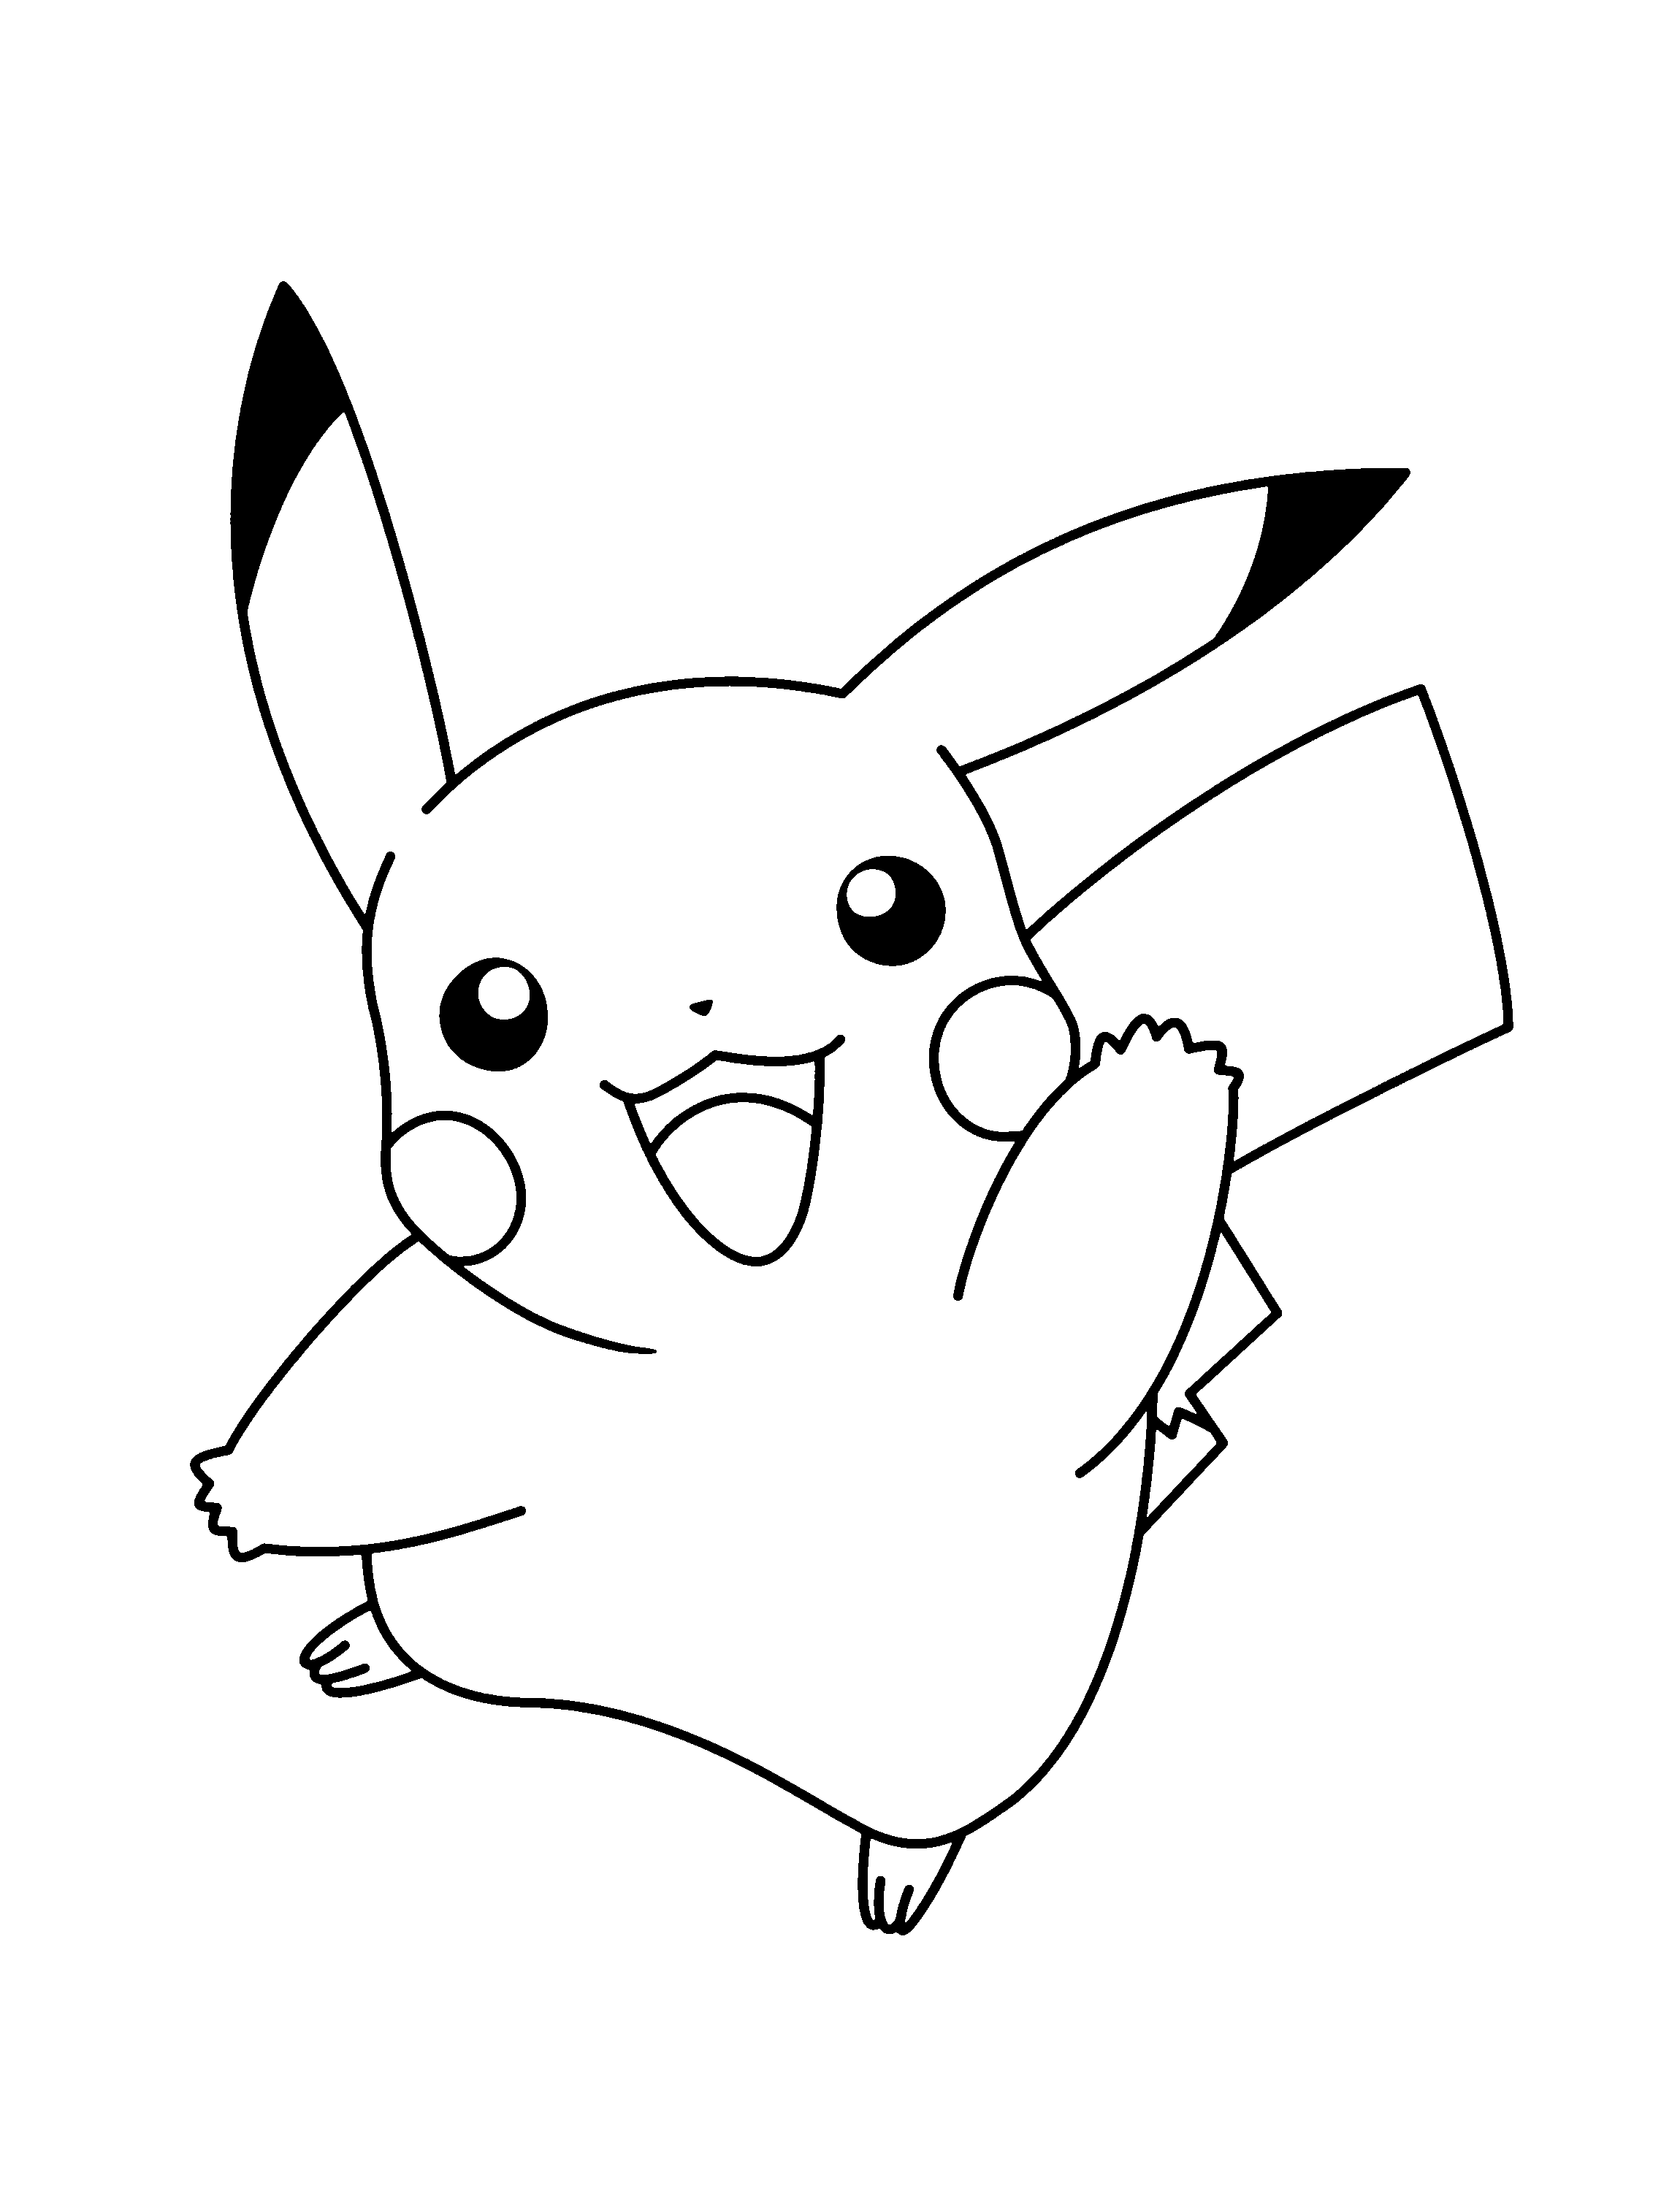 Pokemon Coloring Pages (3) Coloring Kids - Coloring Kids